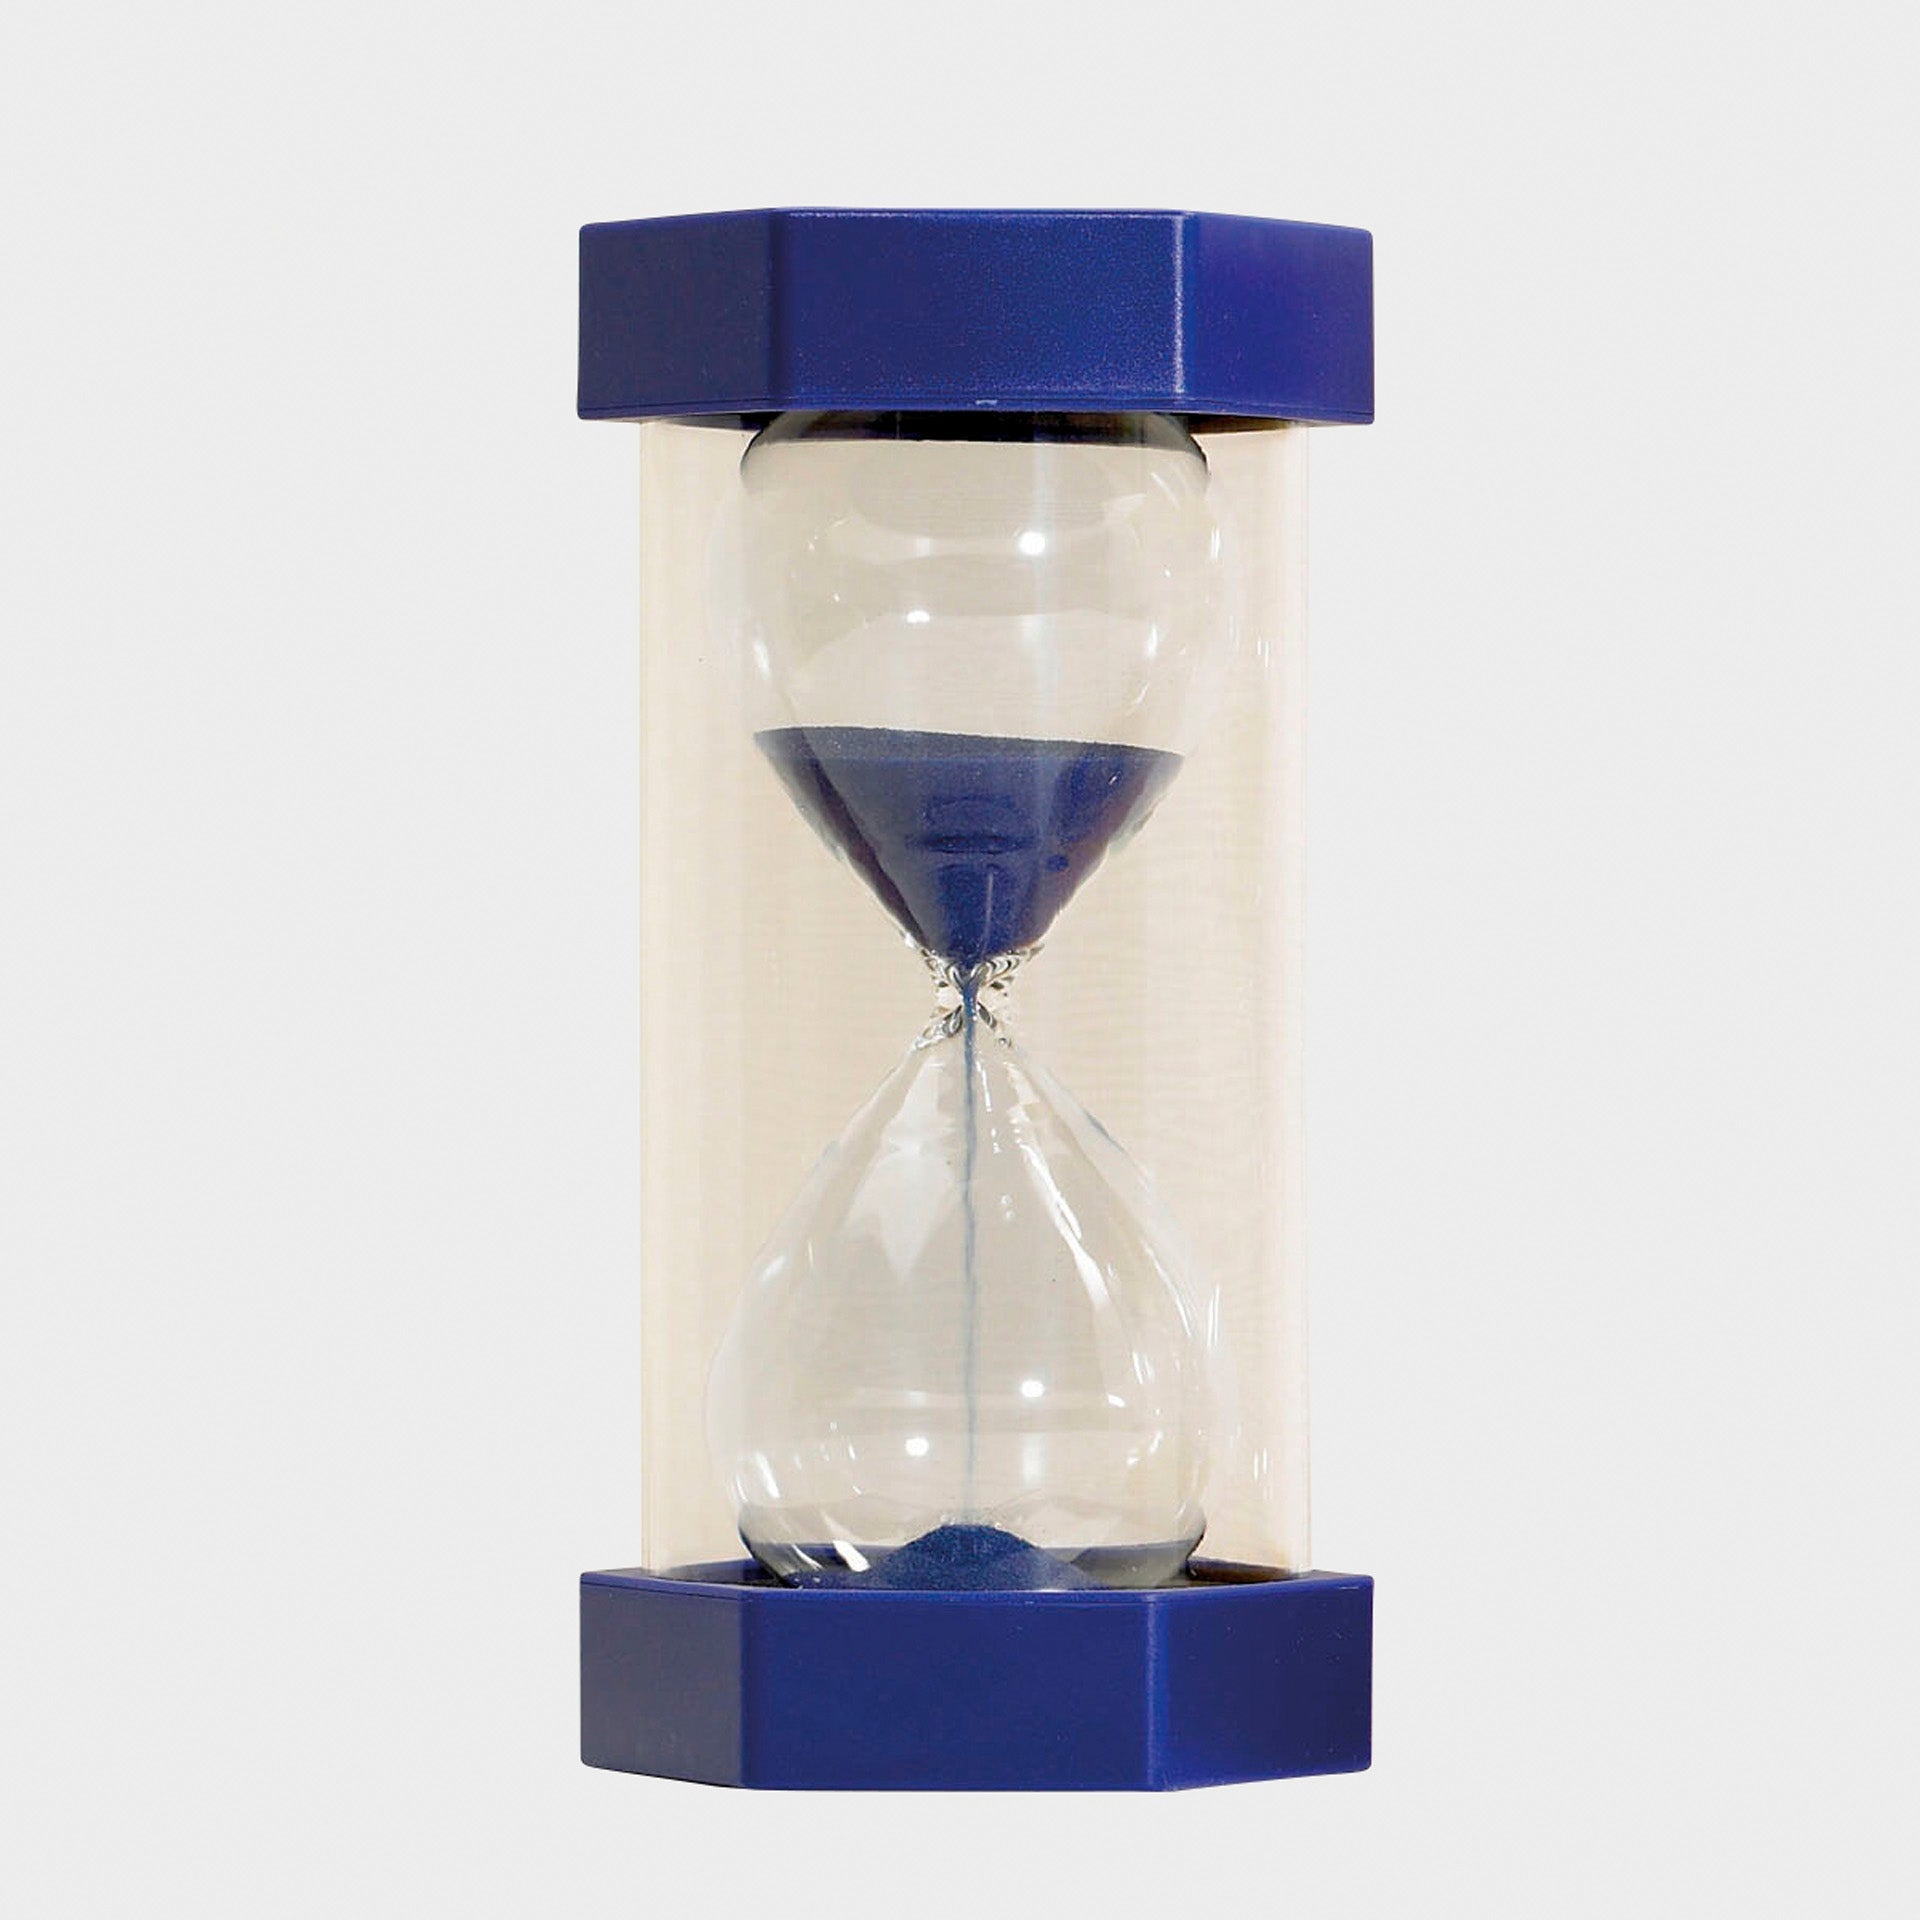 Mega Sand Timer 3 Minutes, These Mega sand timers are probably the largest sand timers in existence at 300mm in height. The Mega Sand timer counts 3 minutes and are visually stunning and perfect for use in a classroom setting. The Mega sand timers have large moulded end caps and thick protective walls which allow for safe and easy handling. Colour coded for different time scales, ideal for games and group activities where time is a factor. Available as 1,3,or 5 minutes. Size 300 x 150mm diameter., Mega Sand